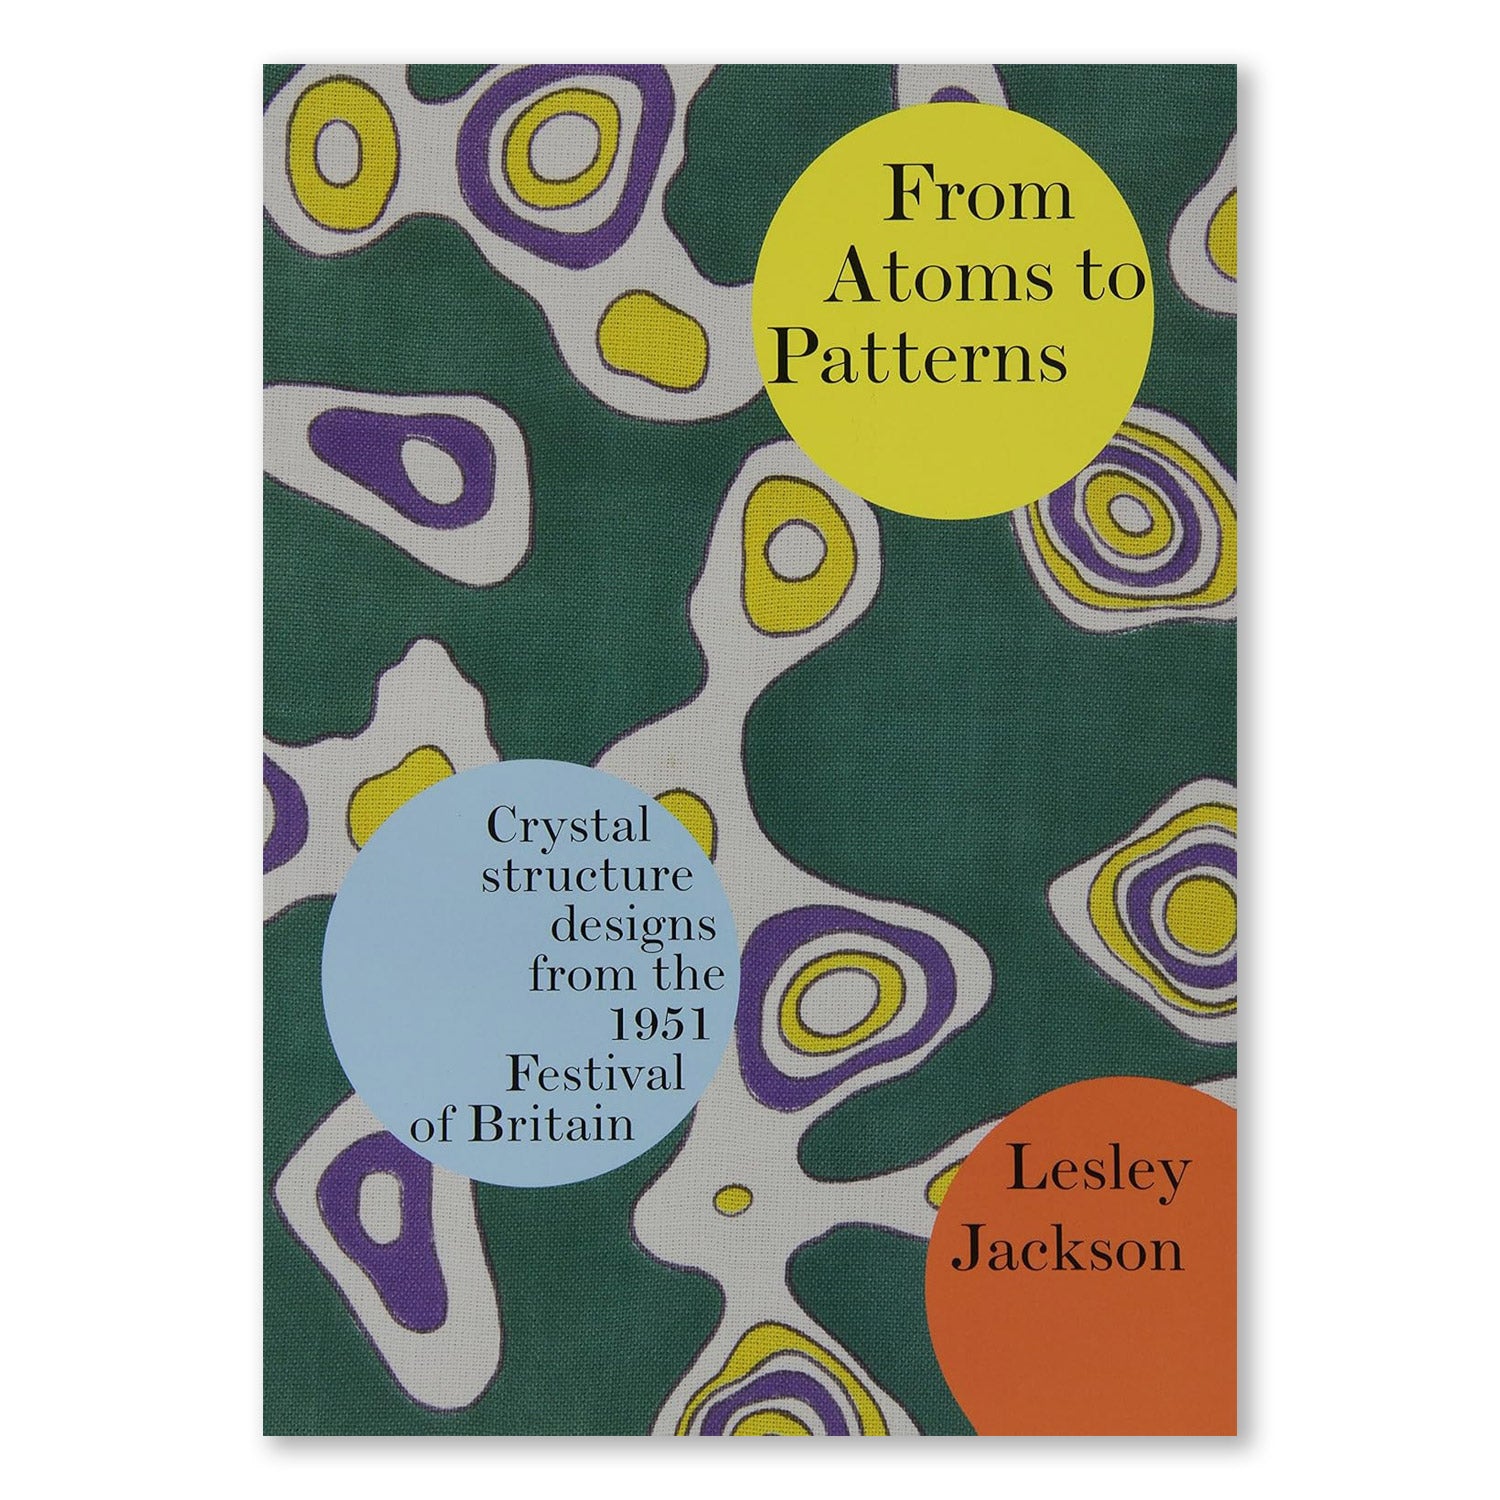 From Atoms to Patterns - Lesley Jackson